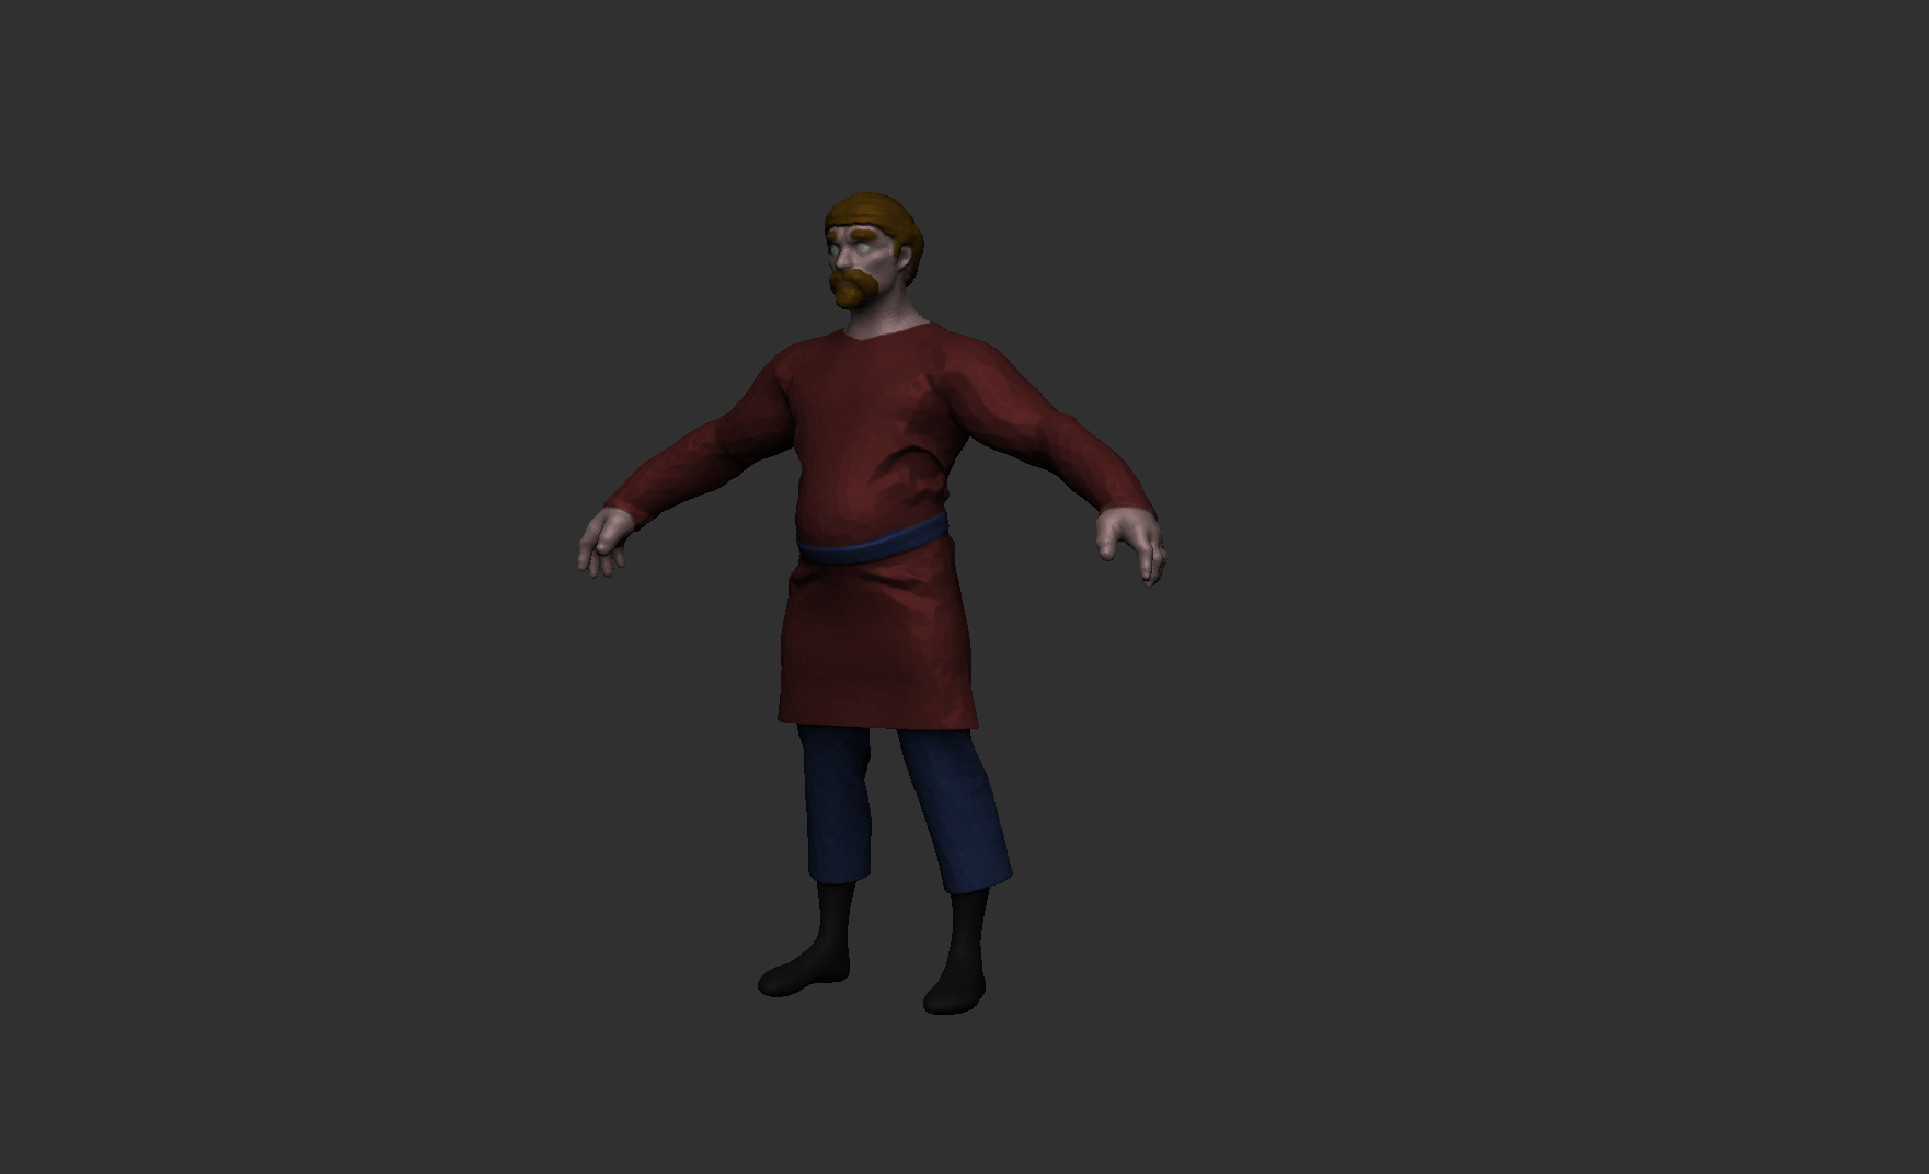 Low poly enemy peasant made in Zbrush and Marvelous Designer.